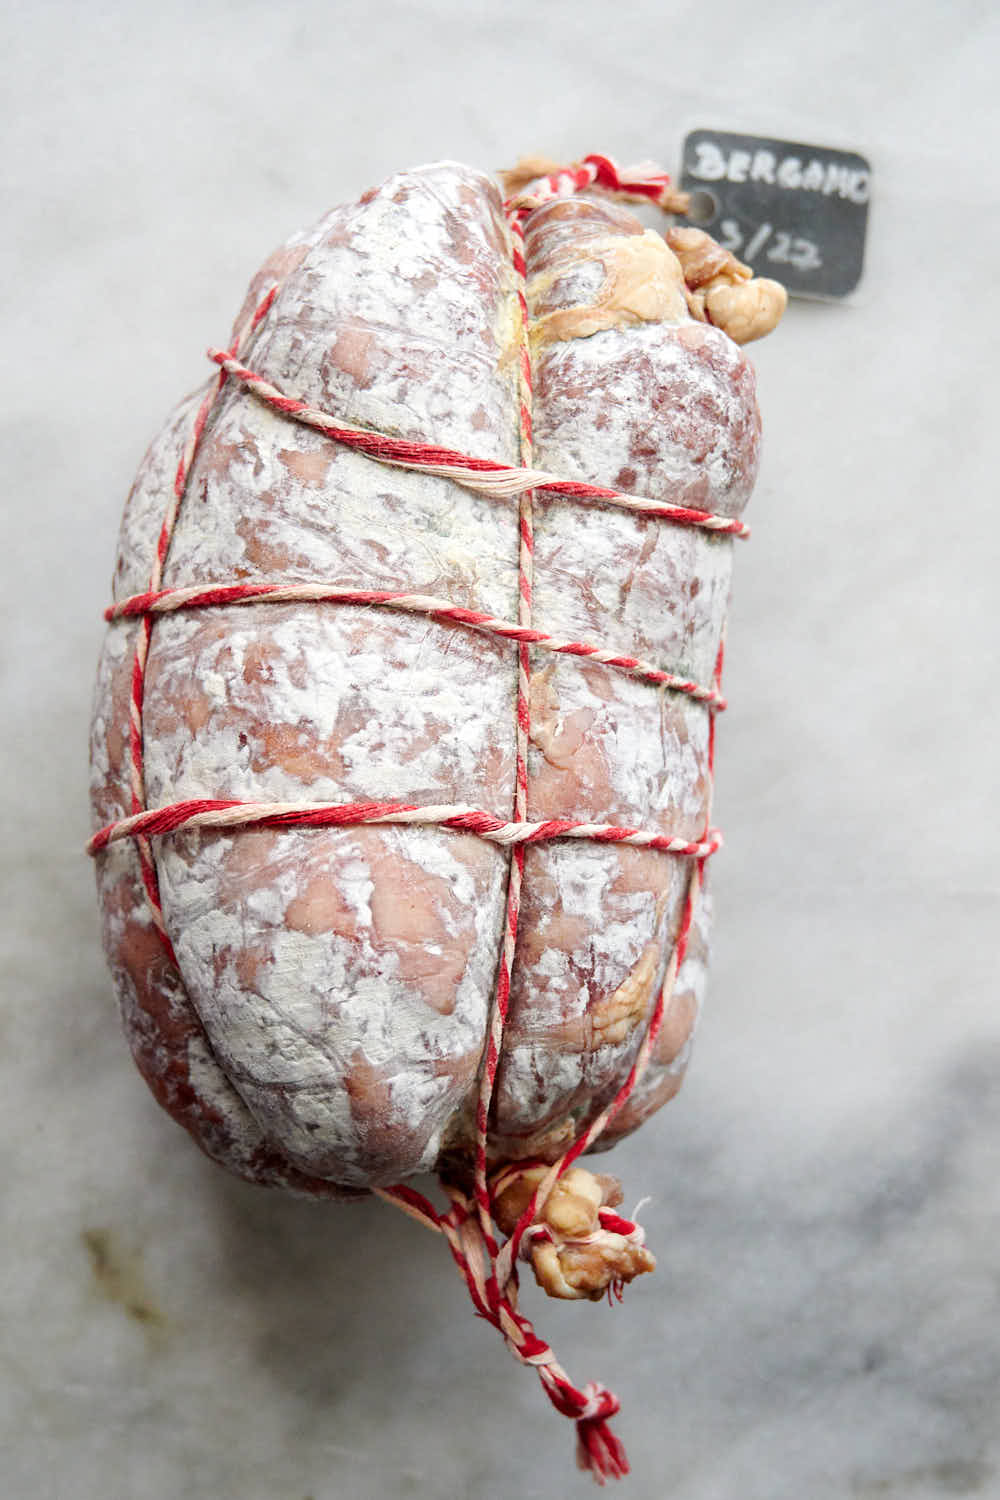 Thick Bergamo salami tied with twine and covered in white mold